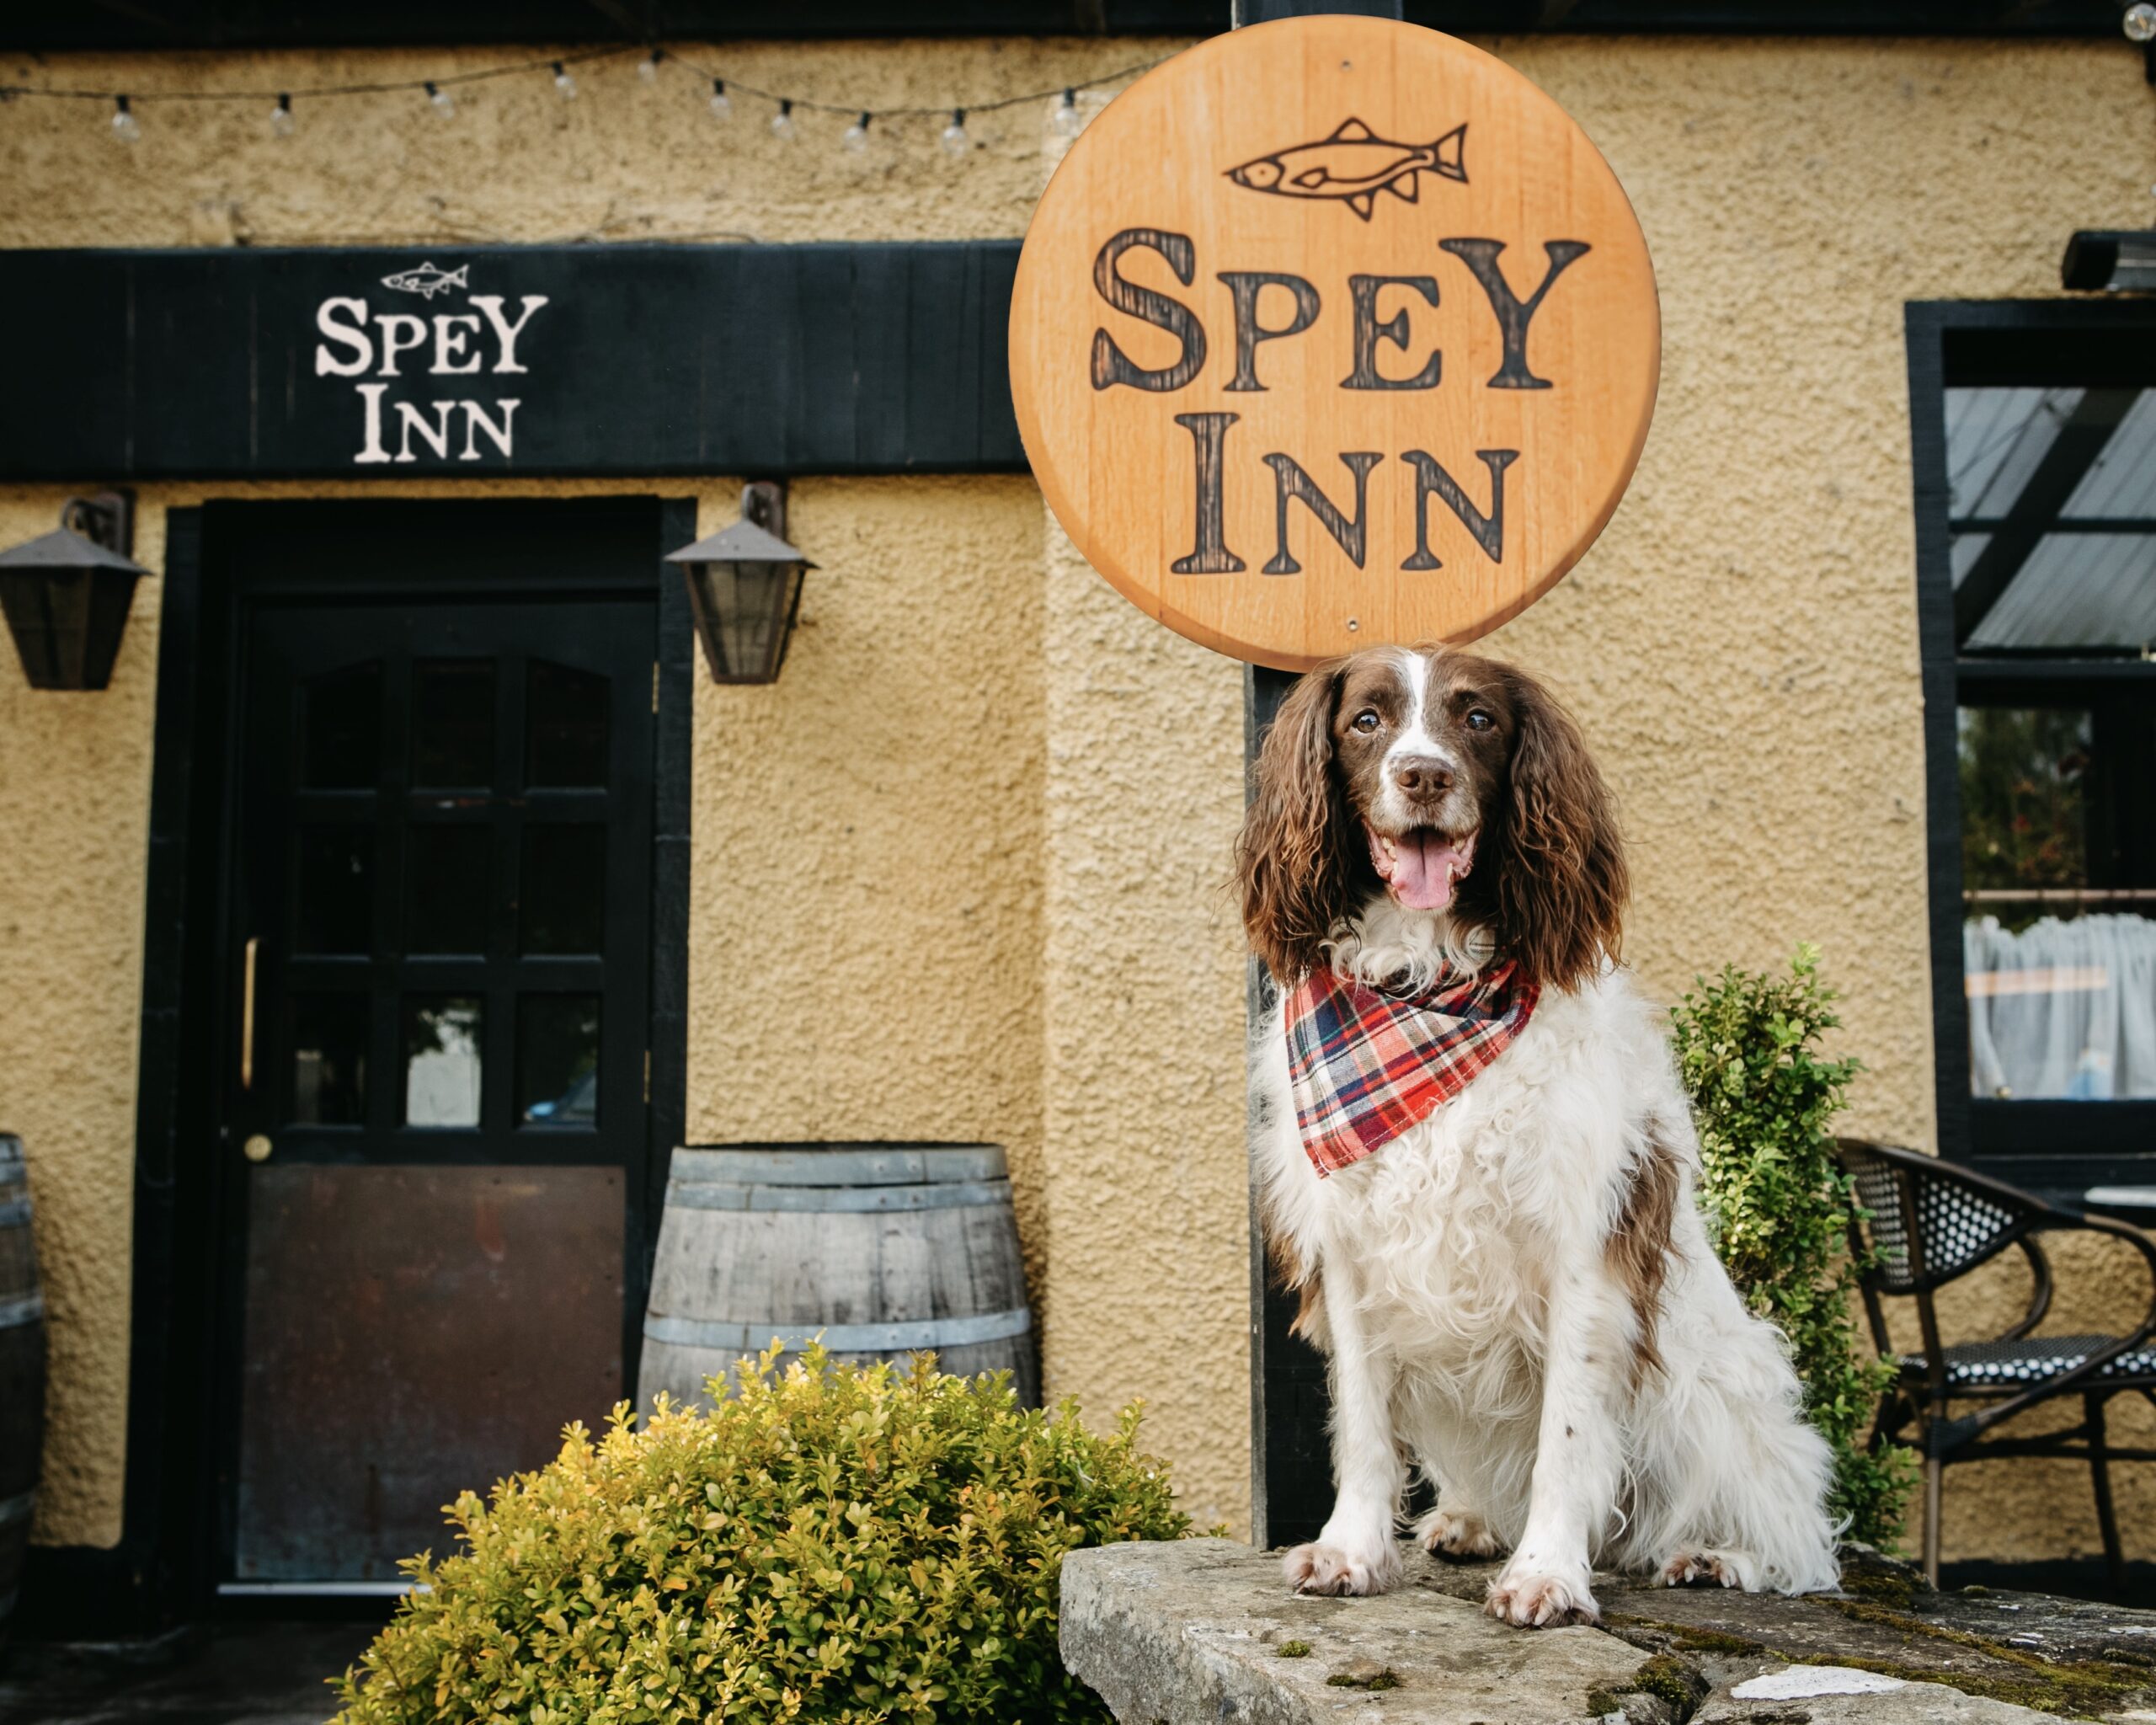 Are you planning your next stay at The Craigellachie? Don’t leave your furry best friend behind! As a proud dog-friendly hotel, our staff always goes the extra mile to make your dogs feel at home. The Craigellachie Bridge beach and the Speyside Way are just a two-minute walk away, offering the perfect backdrop to make your dog’s adventure as unforgettable as the finest drams you will enjoy at The Craigellachie Hotel.